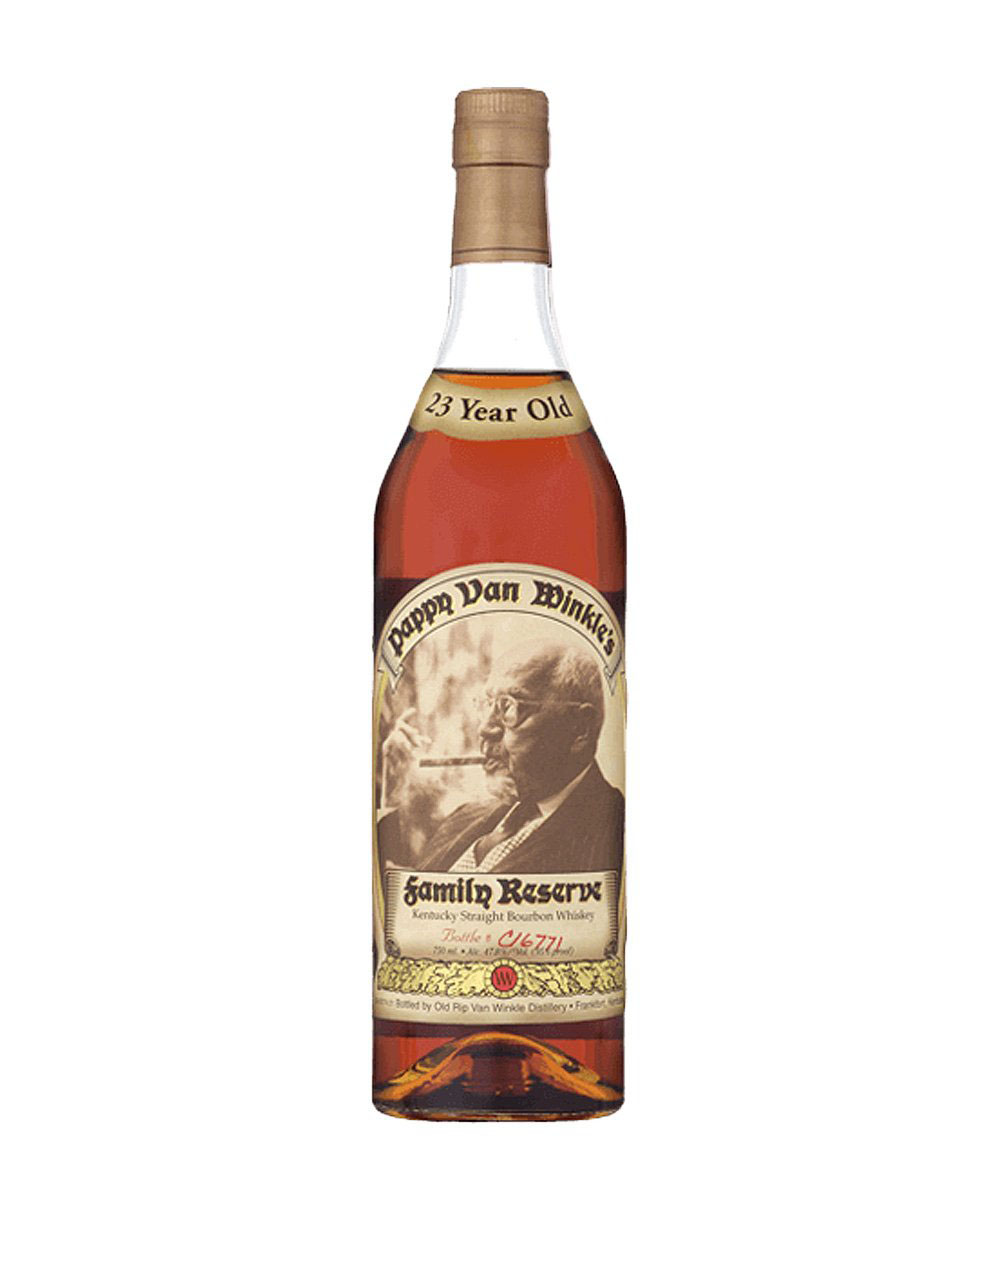 Pappy Van Winkle's Family Reserve 23 Year Old Bourbon Whiskey